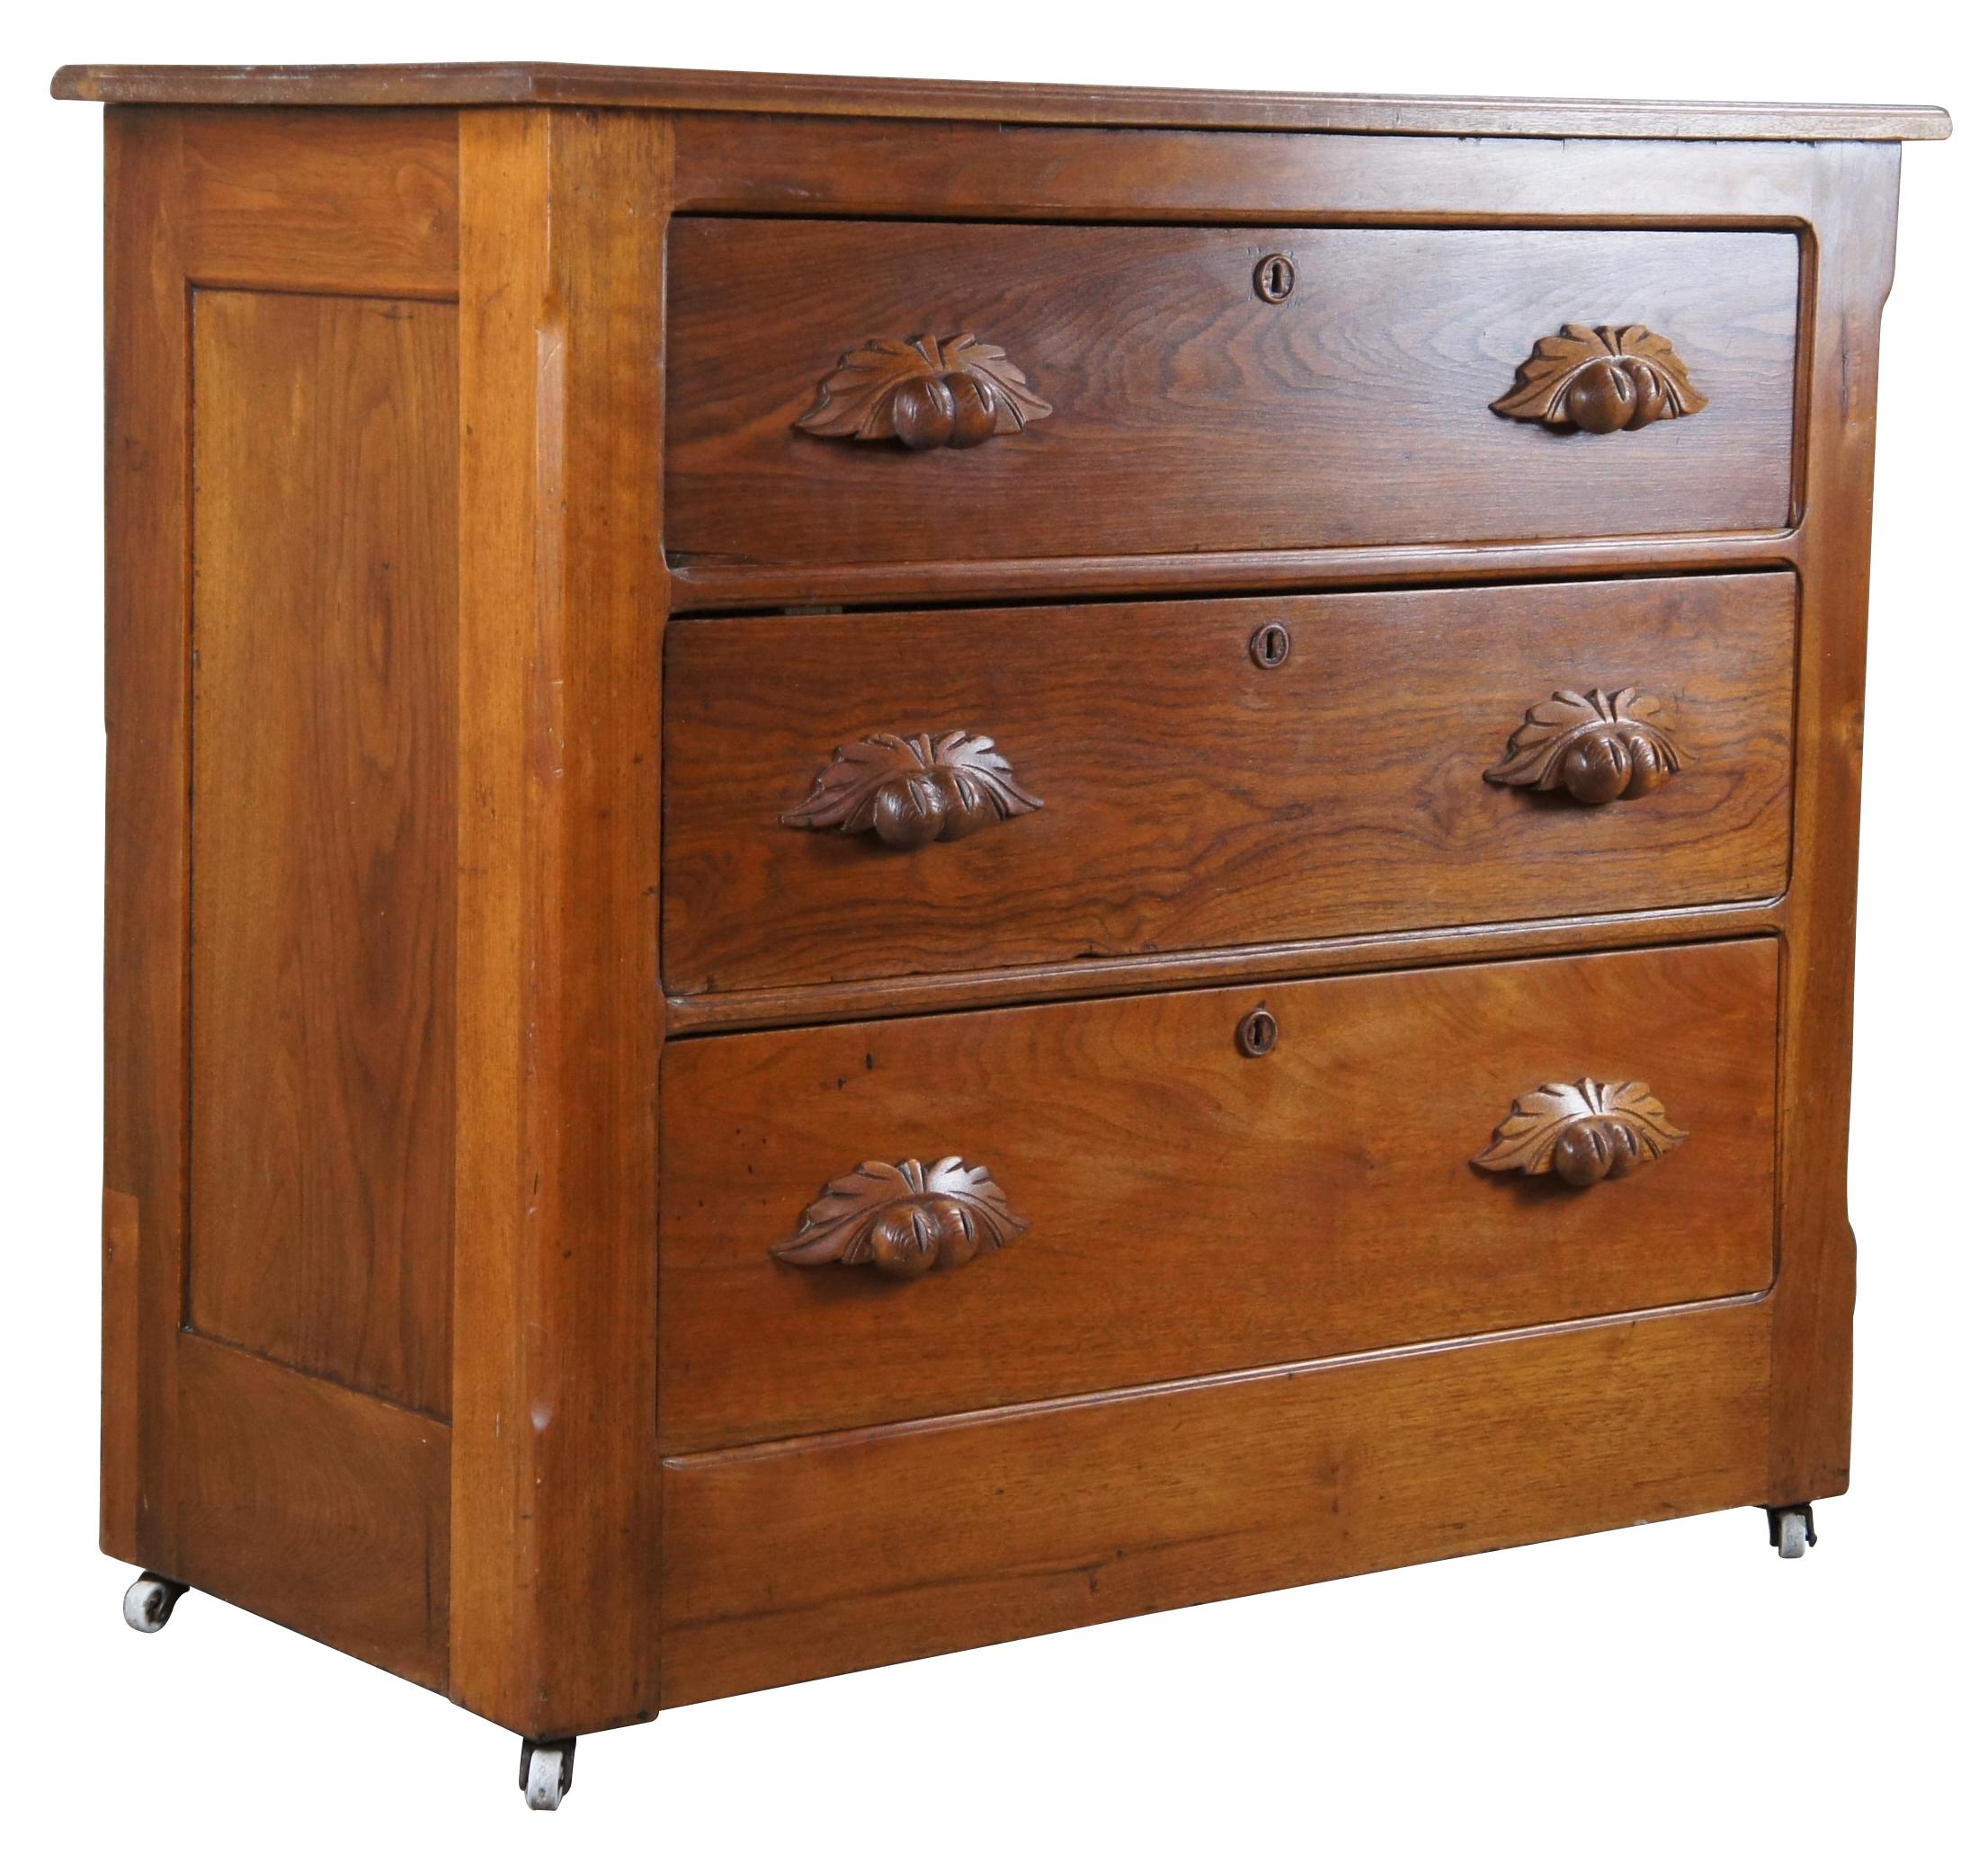 A beautiful American Victorian era dresser. Made from walnut with three dovetailed drawers and chamfered corners. The drawers are dovetailed via the Knapp Joint. Features carved fruit and nut pulls and porcelain casters. 

The Knapp joint was